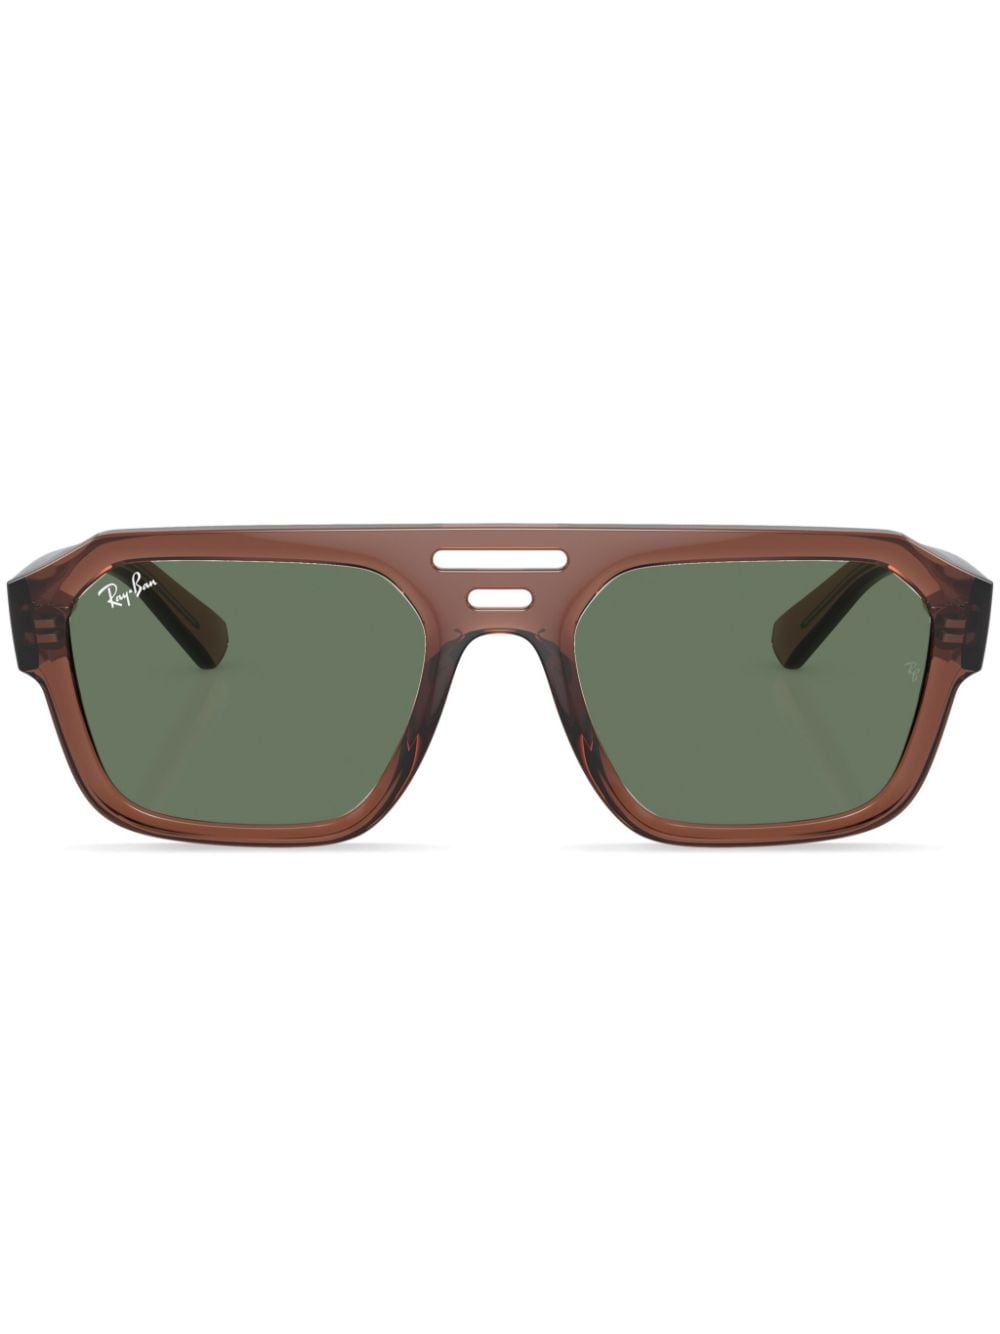 Ray Ban Sunglasses Unisex Corrigan Bio-based - Transparent Brown Frame Green Lenses 54-20 In Red/green Solid